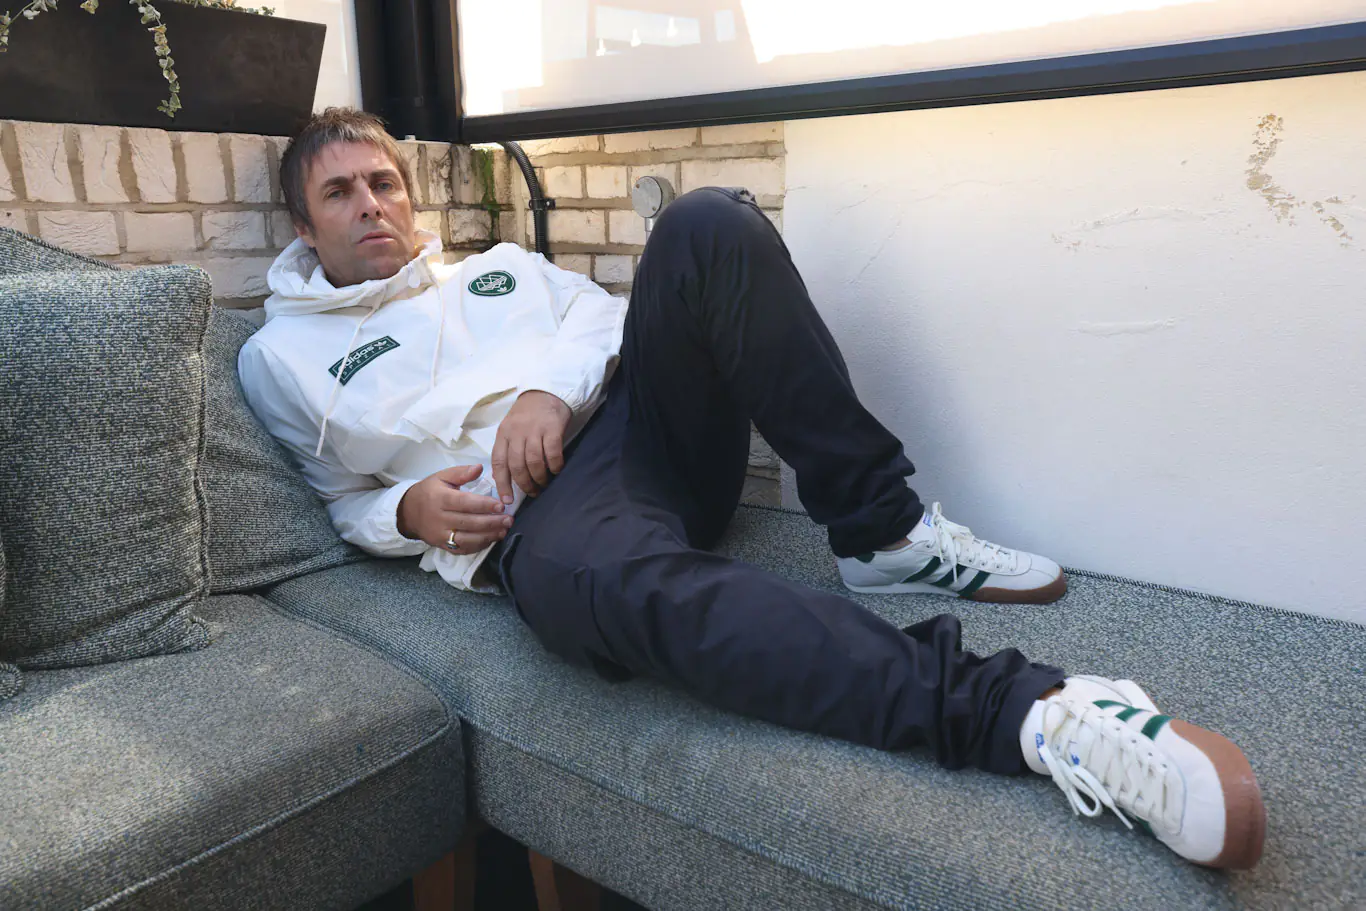 adidas Spezial and LIAM GALLAGHER Launch a New Colourway of the Collaborative LG2 SPZL Silhouette